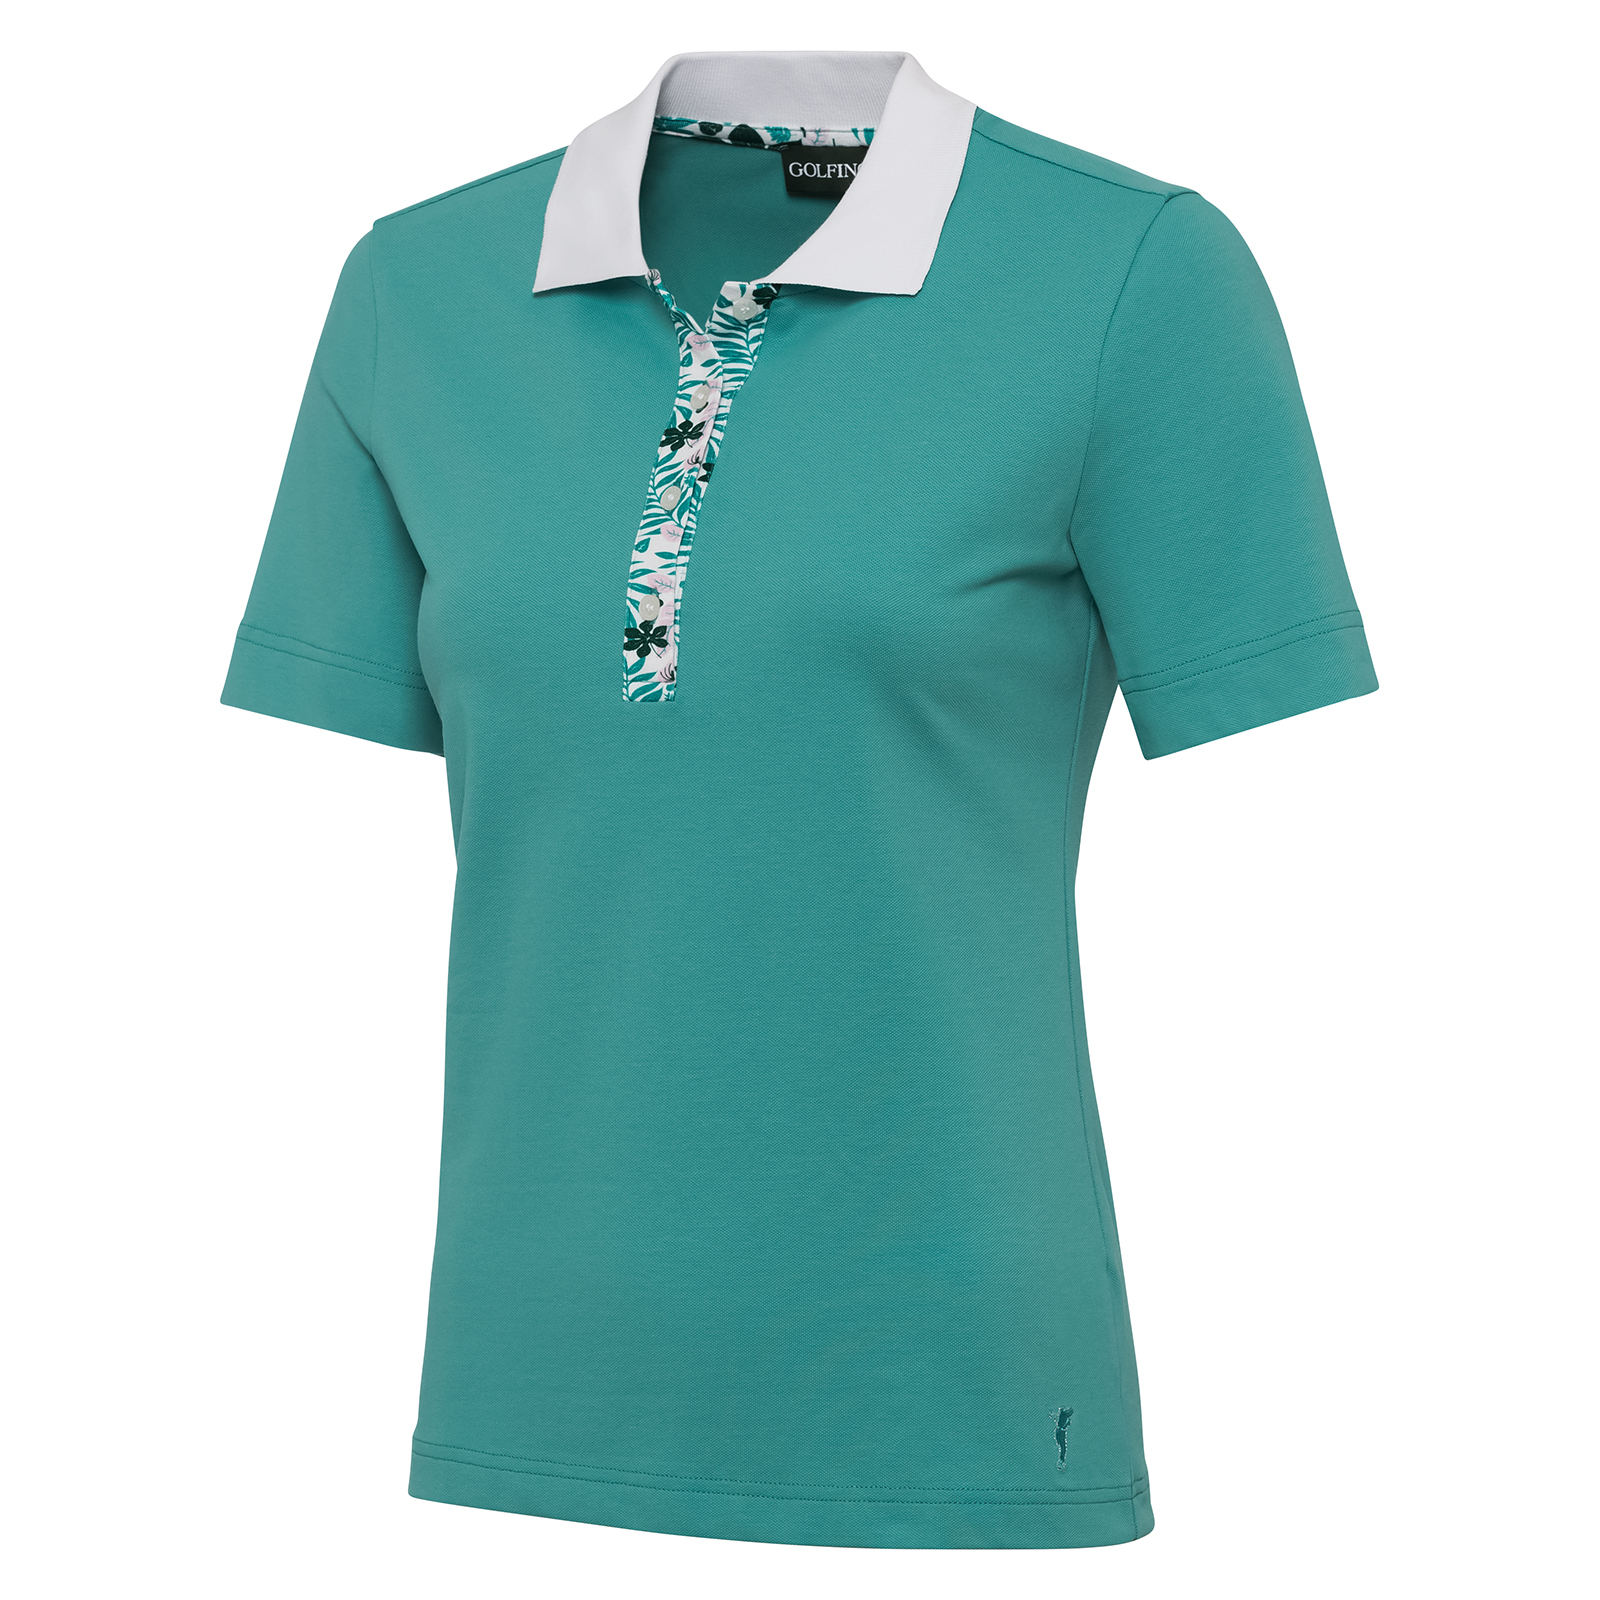 Ladies' golf polo shirt with sun protection